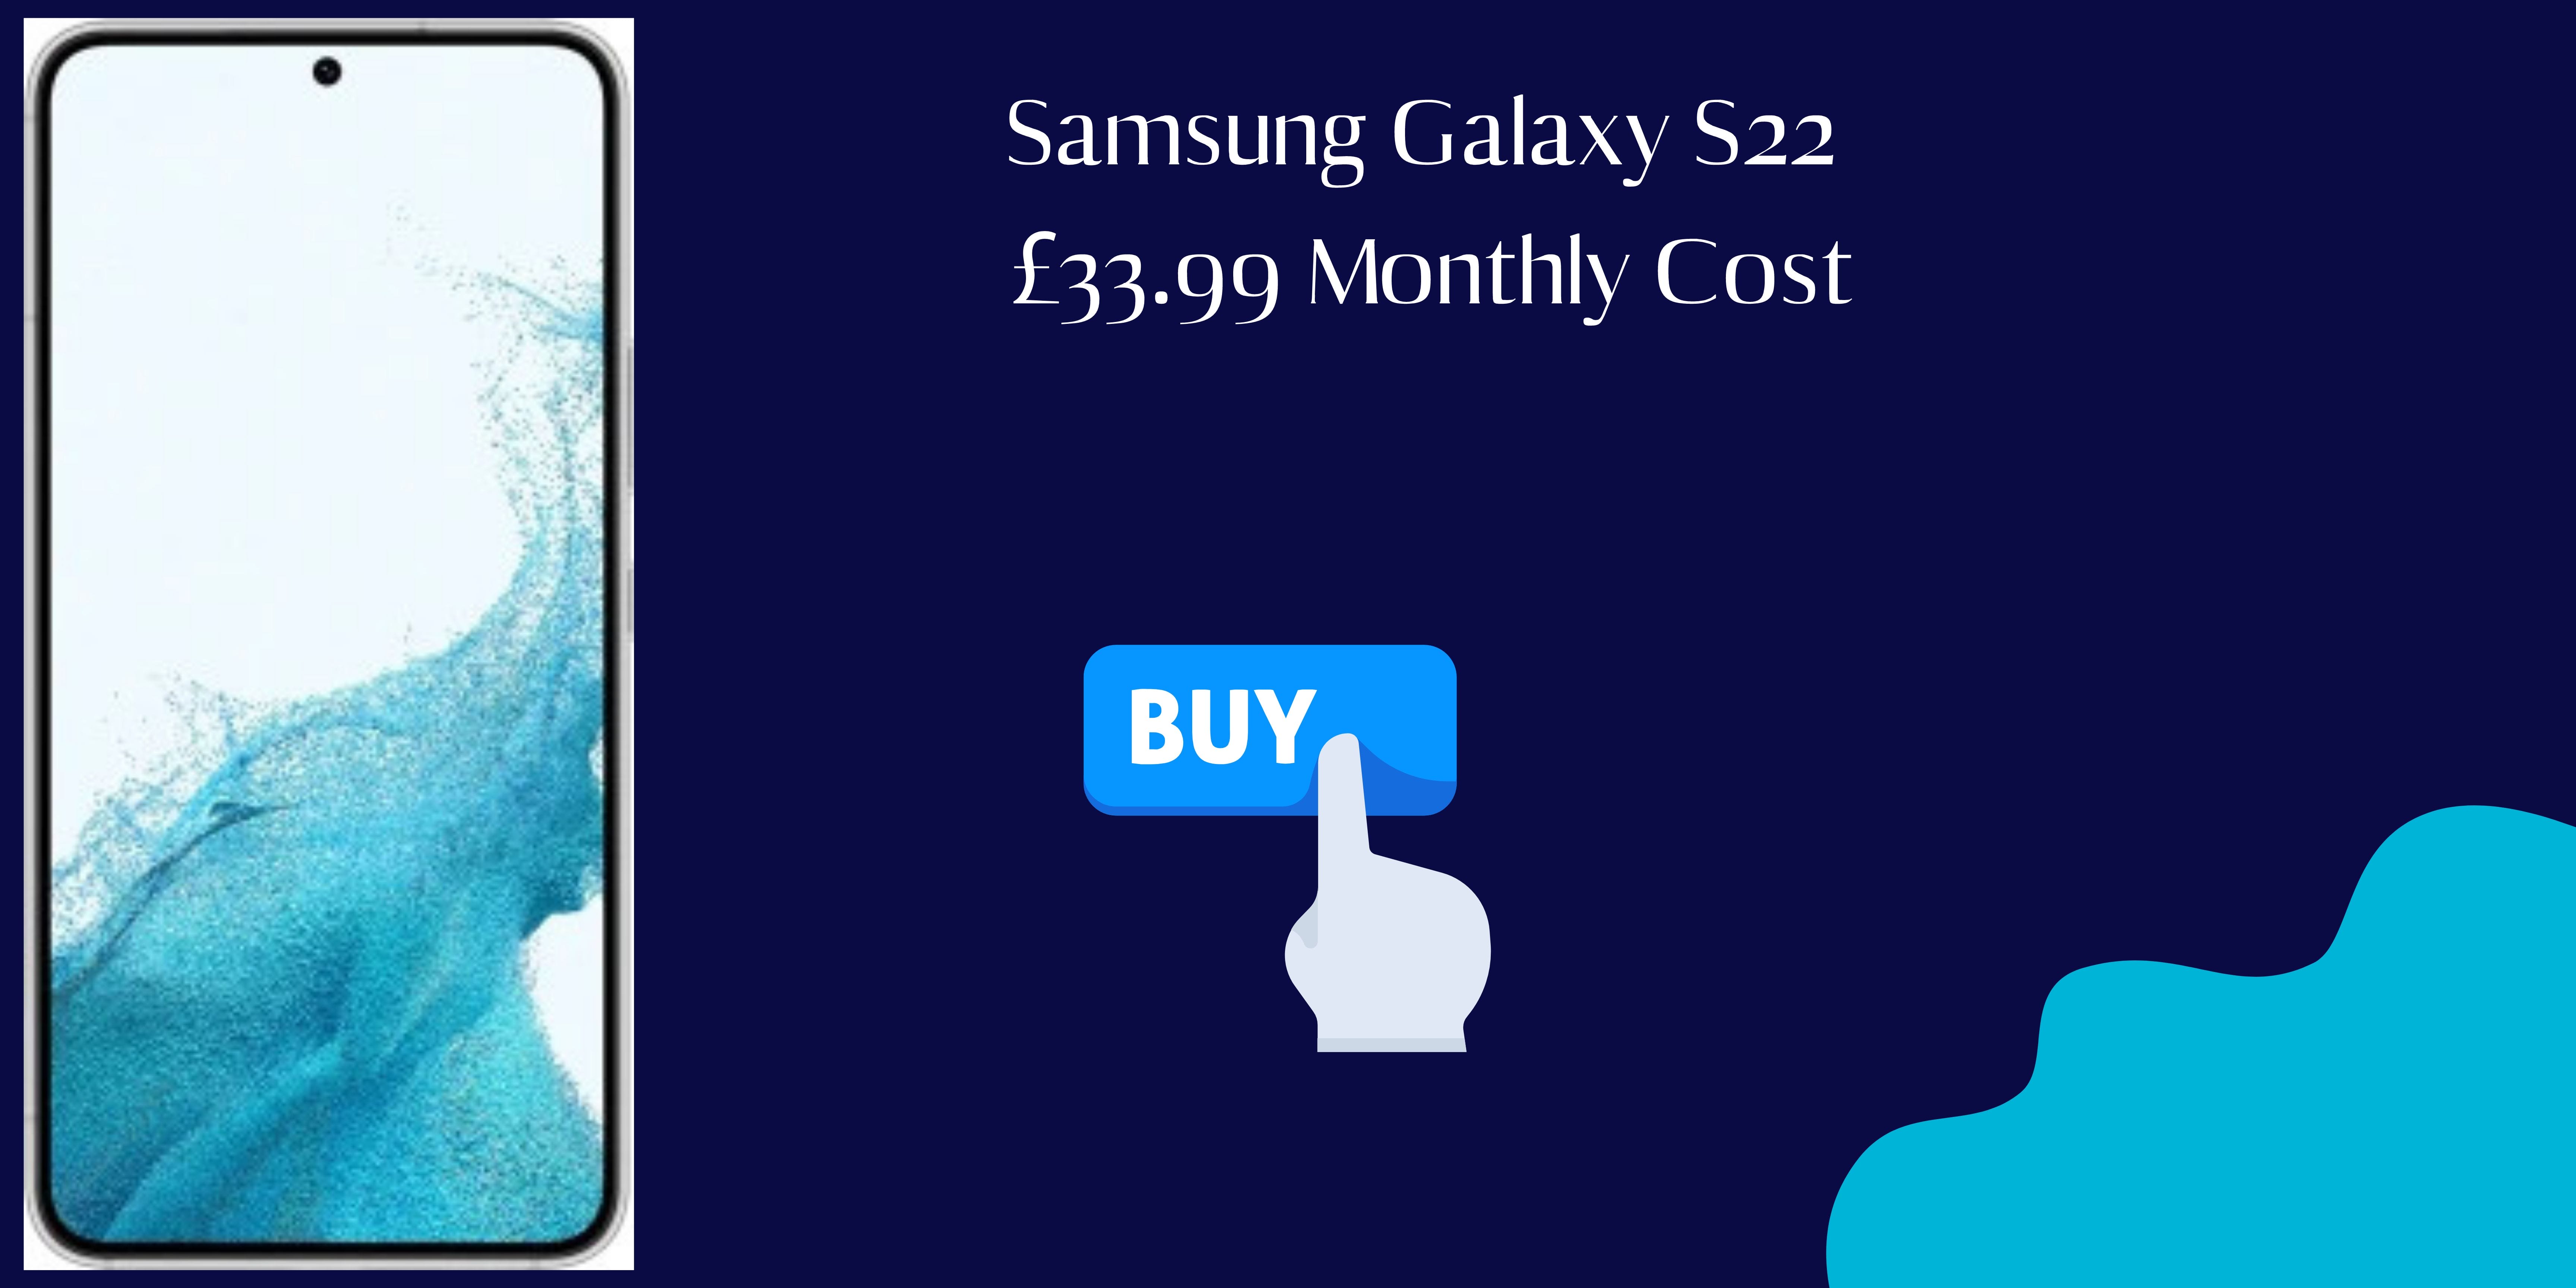 Samsung Galaxy S22 |£33.99 Monthly Cost